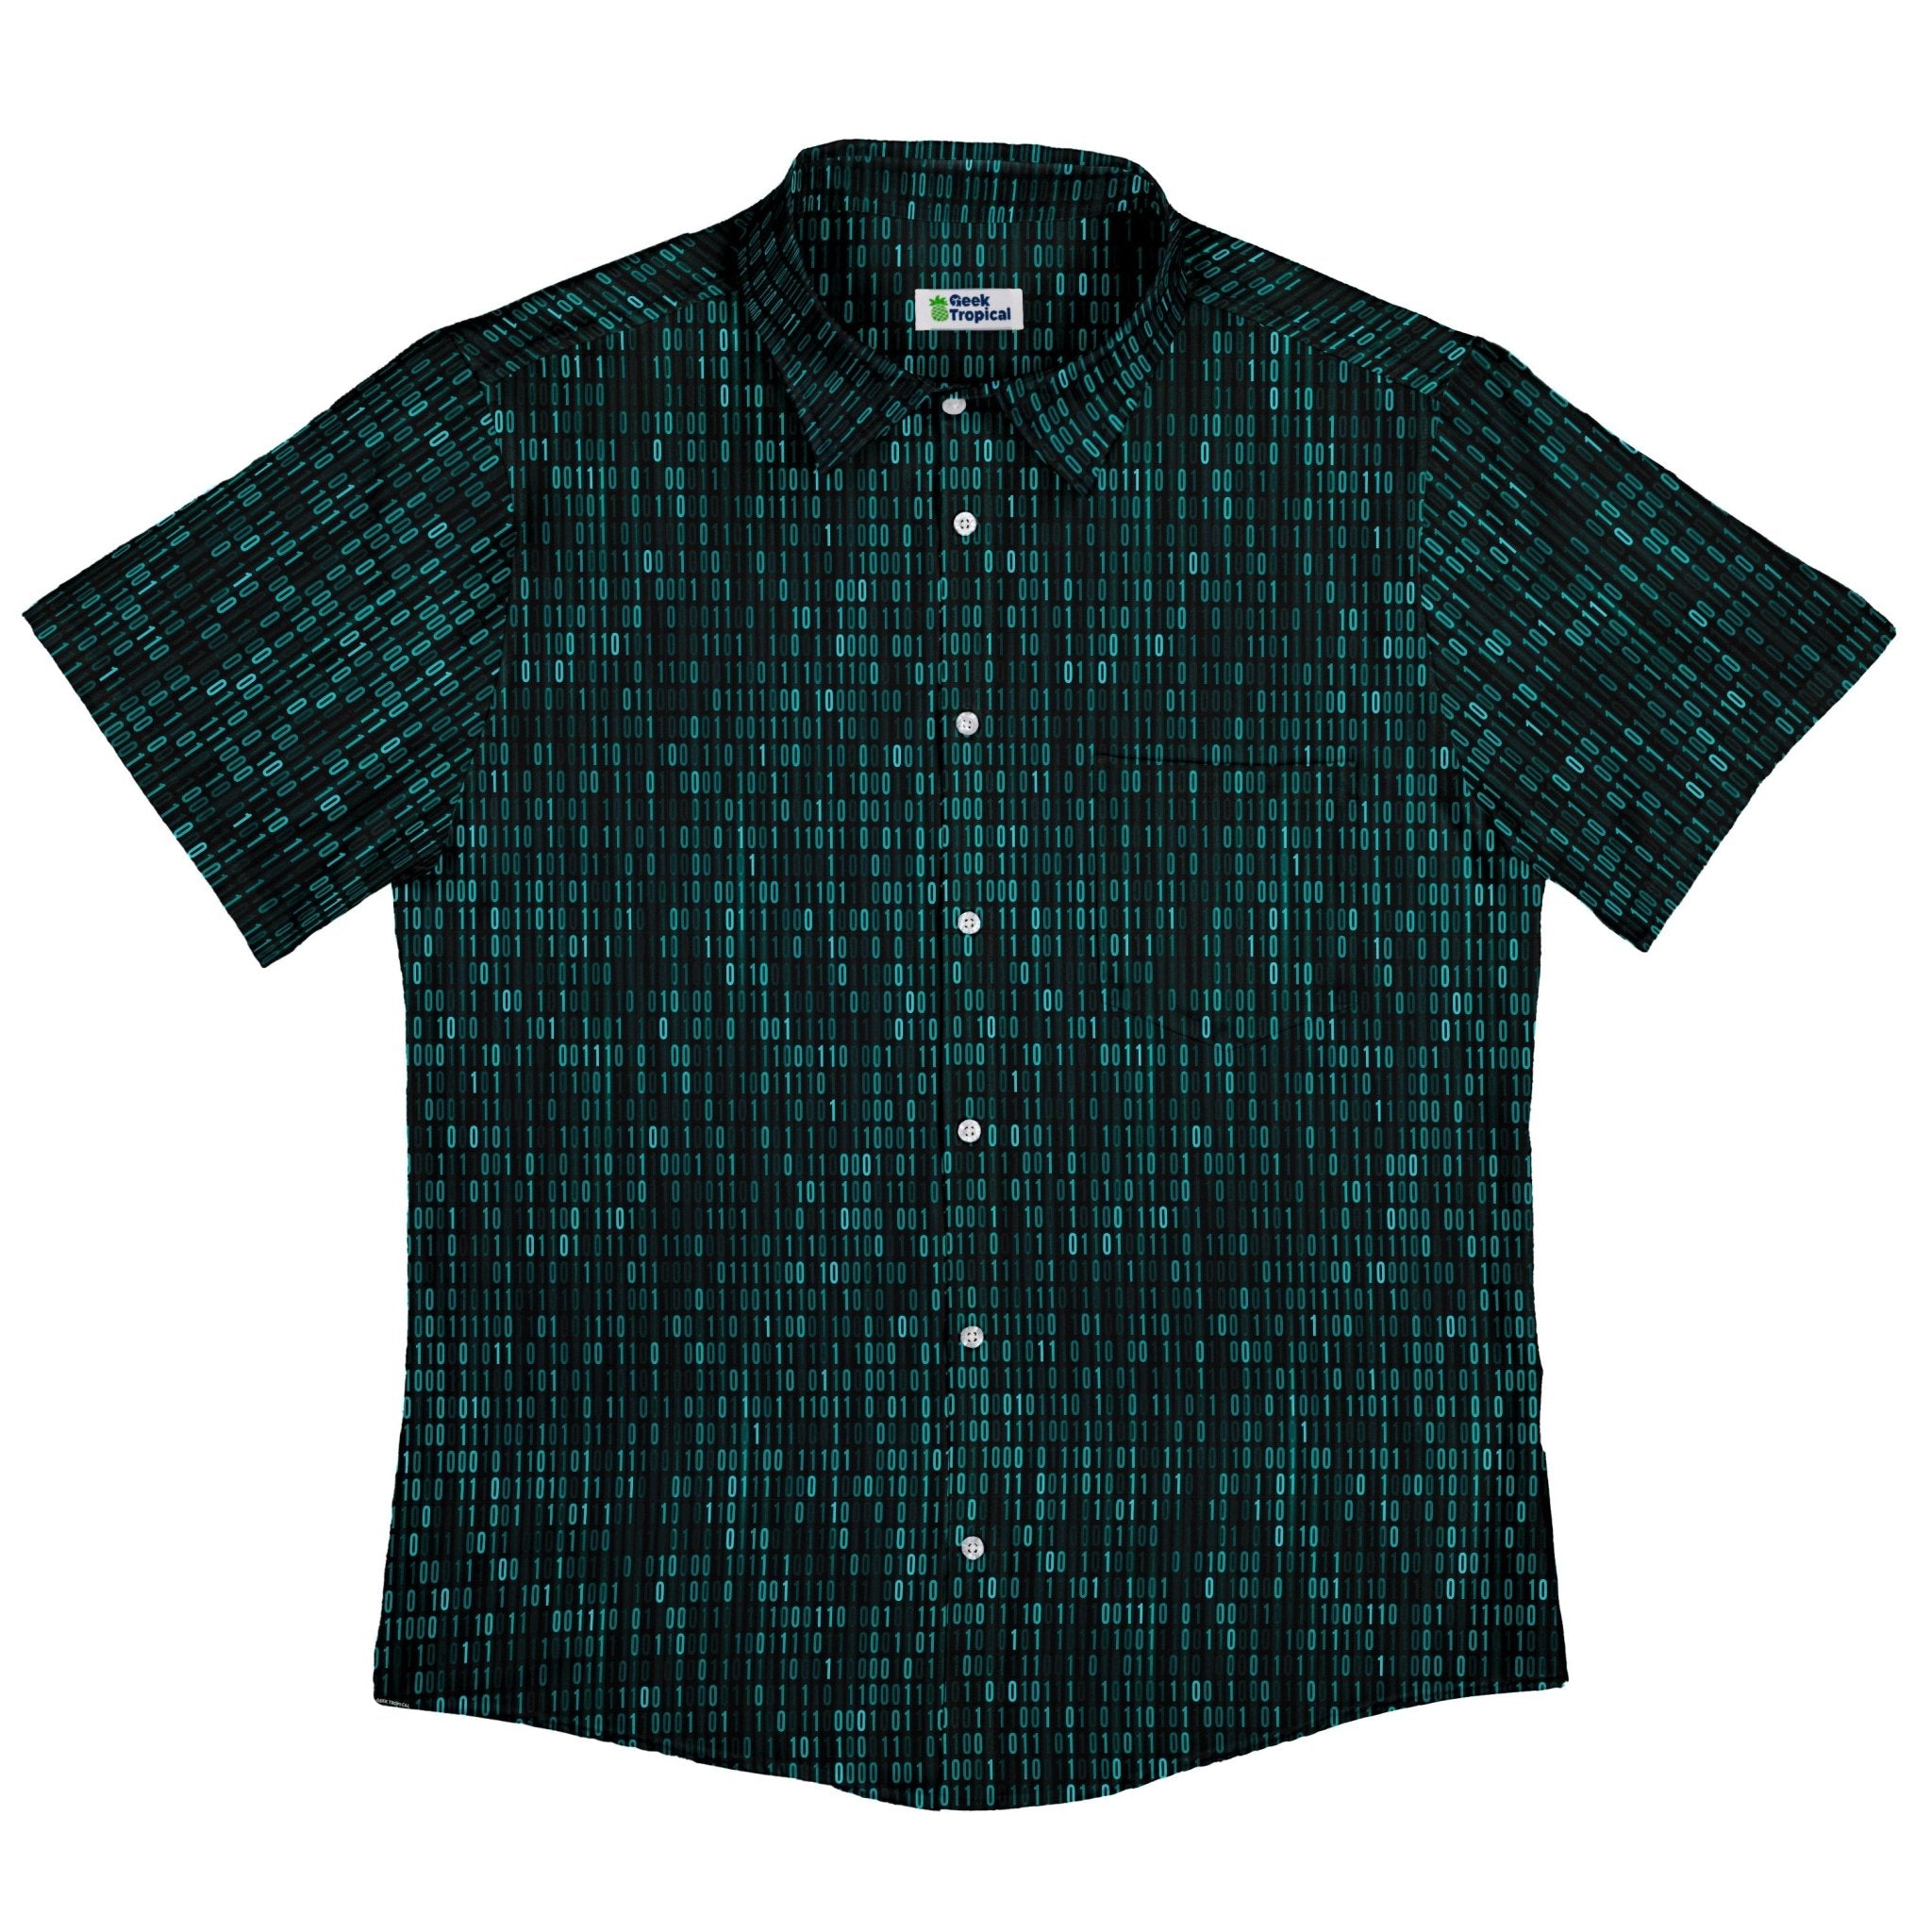 Binary Computer 1s and 0s Teal Black Button Up Shirt - adult sizing - computer print - Simple Patterns